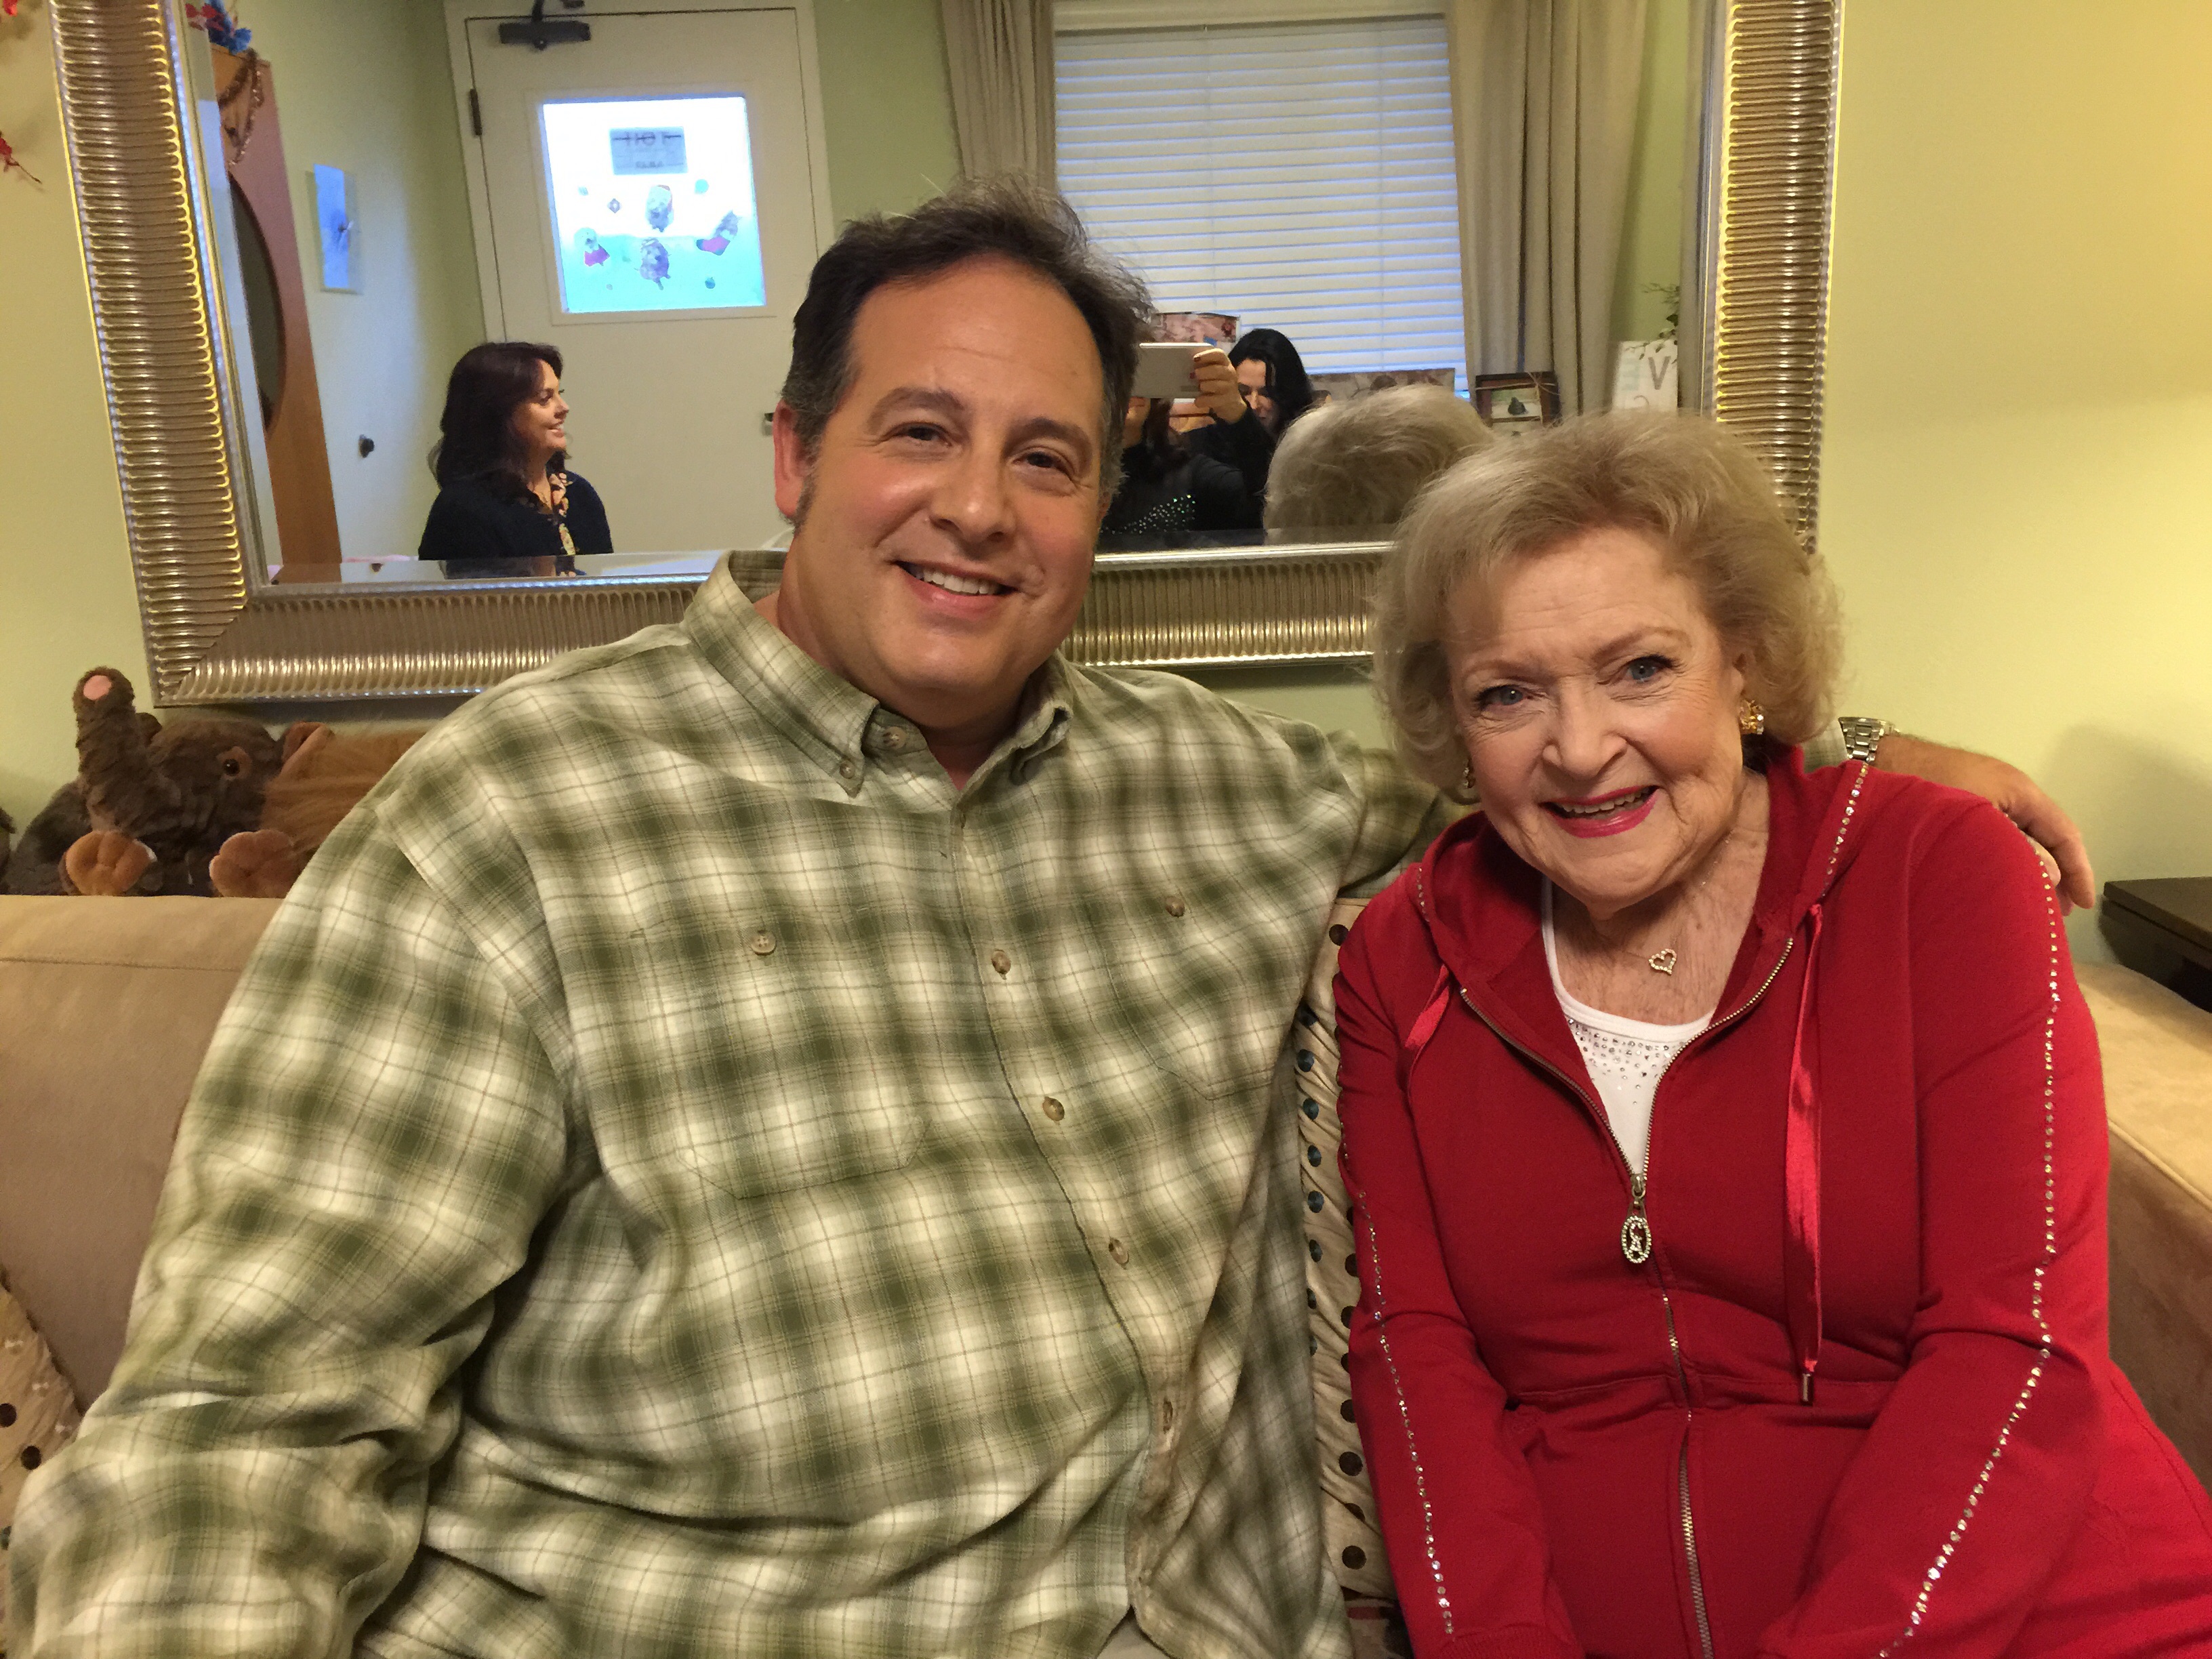 Roger Rignack with the iconic Betty White. On the set of Hot In Cleveland. Playing the role of Pete.